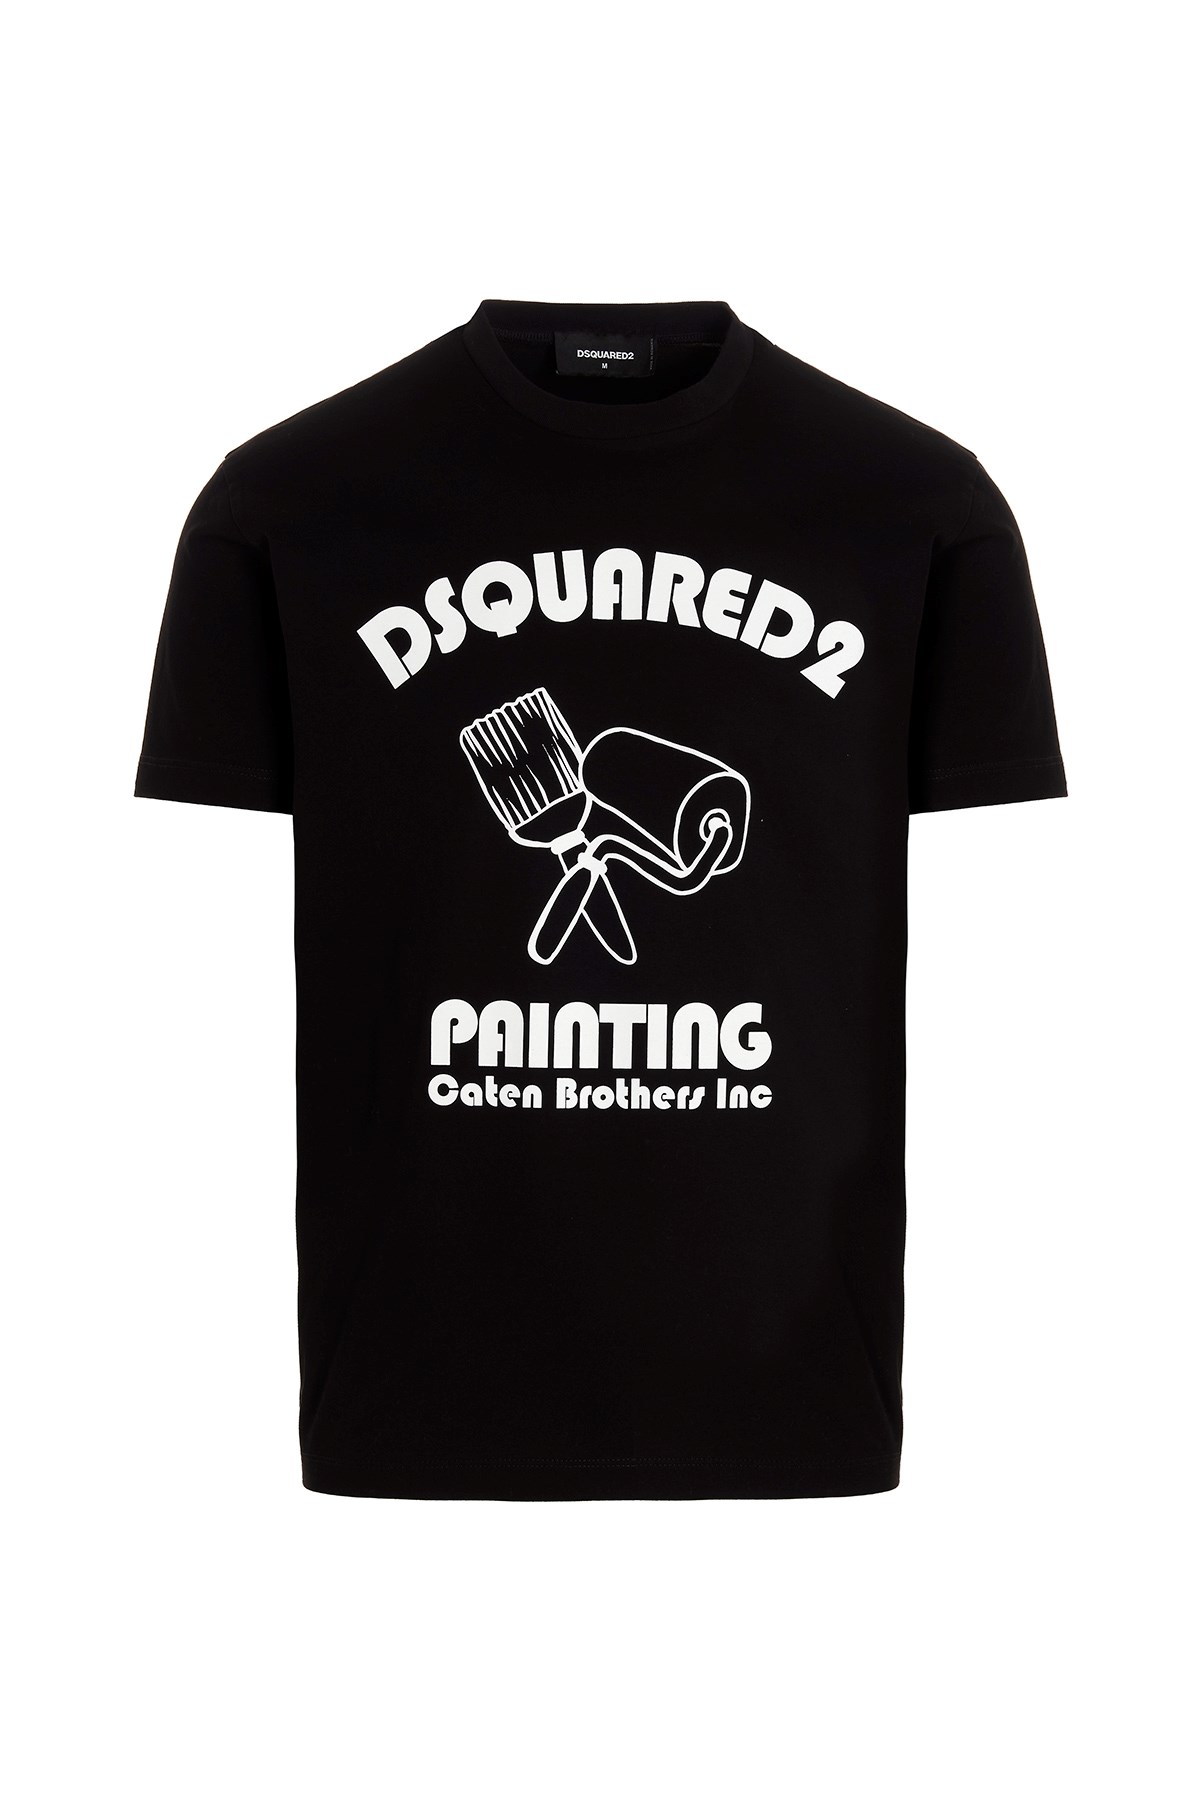 DSQUARED2 'Painting’ T-Shirt